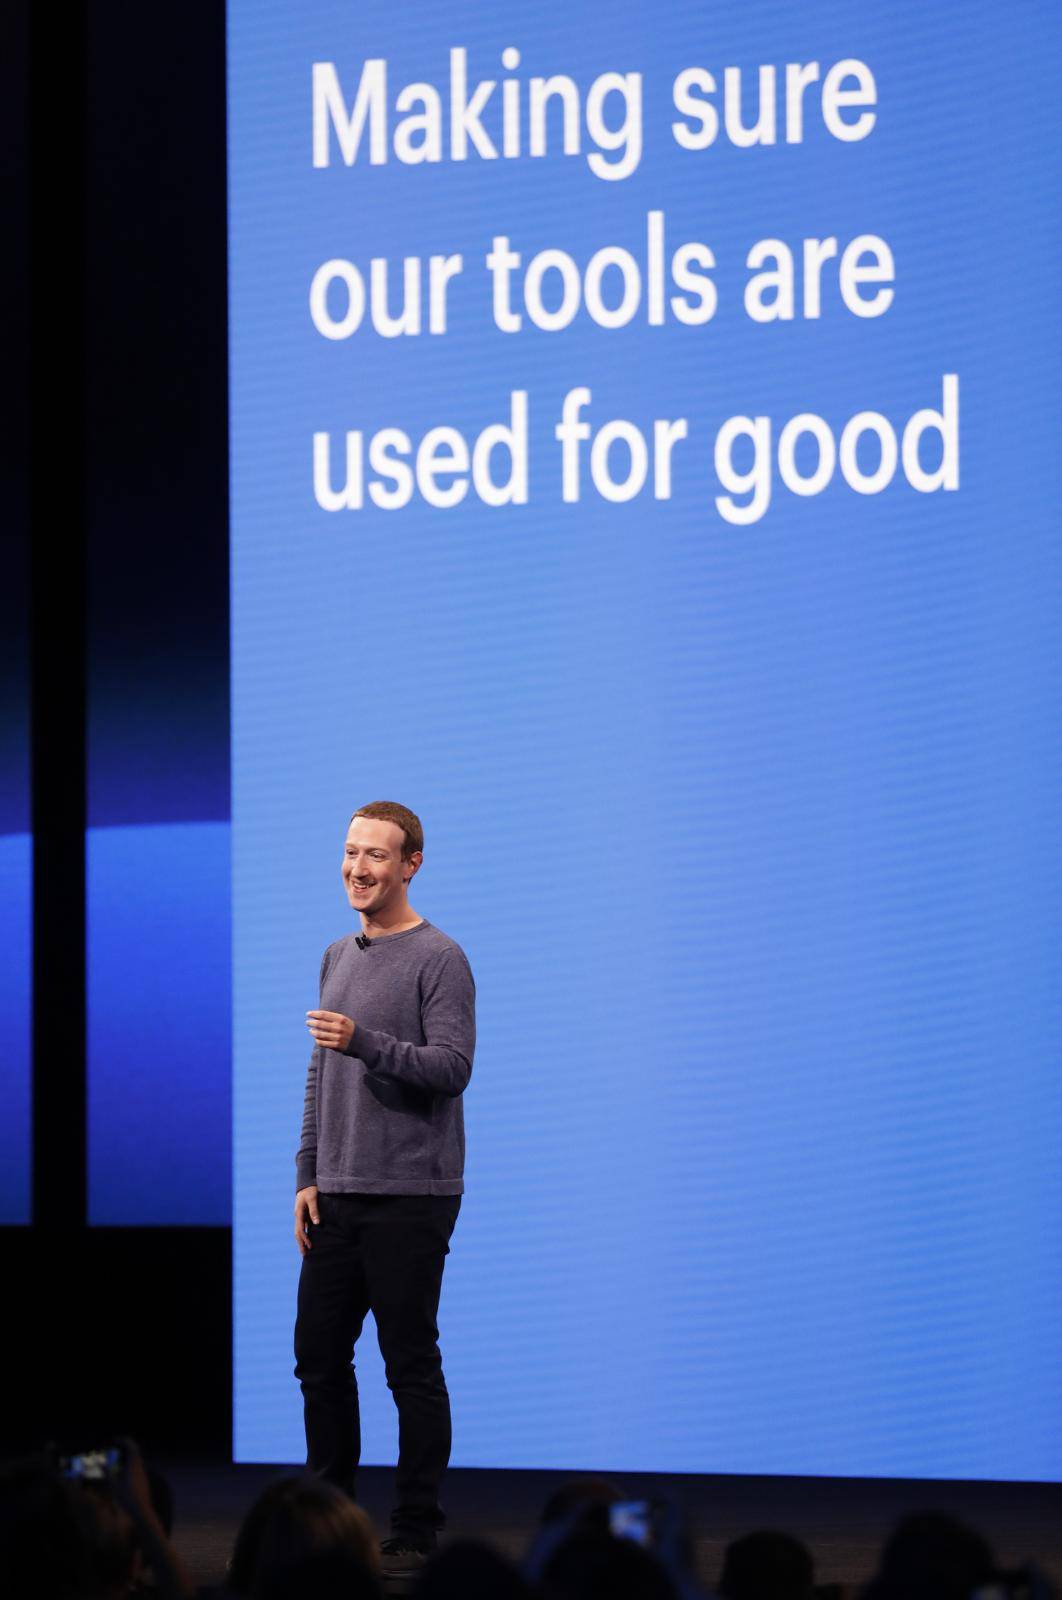 Facebook CEO Mark Zuckerberg speaks about privacy during his keynote at Facebook Inc's annual F8 developers conference in San Jose